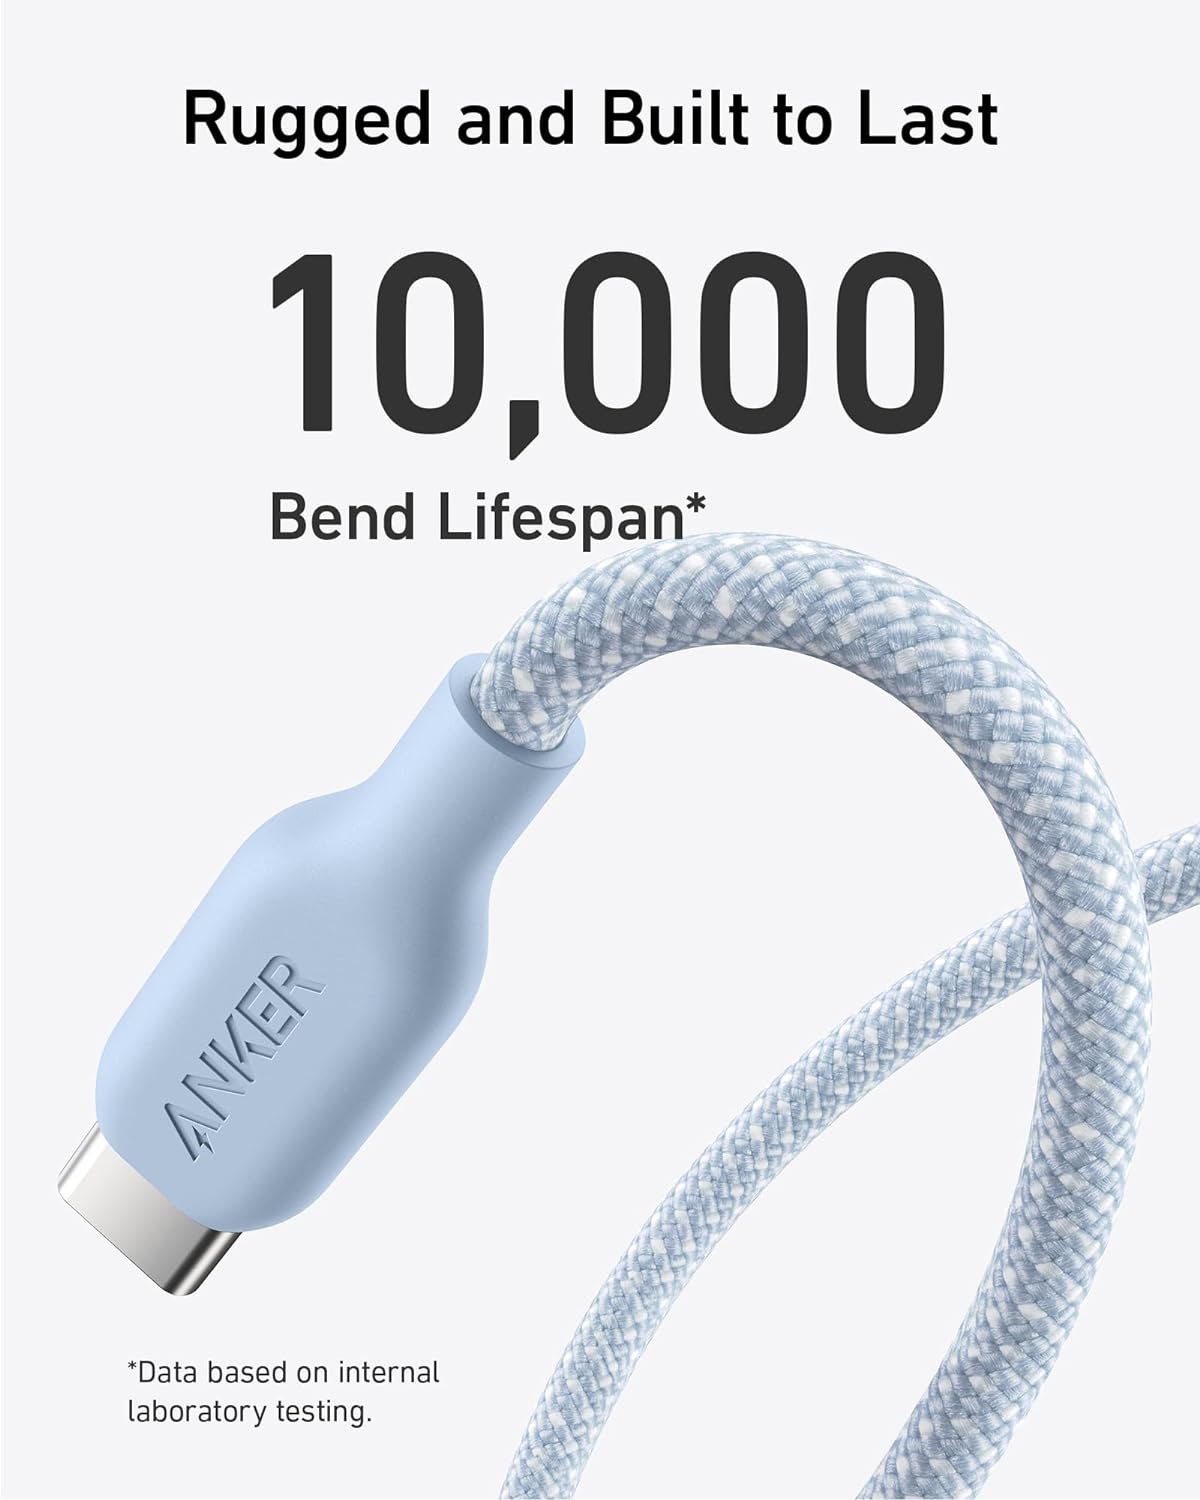 Anker USB C to USB C Cable (240W, 10ft), Bio-Braided USB C Charger Cable(Ice Lake Blue)